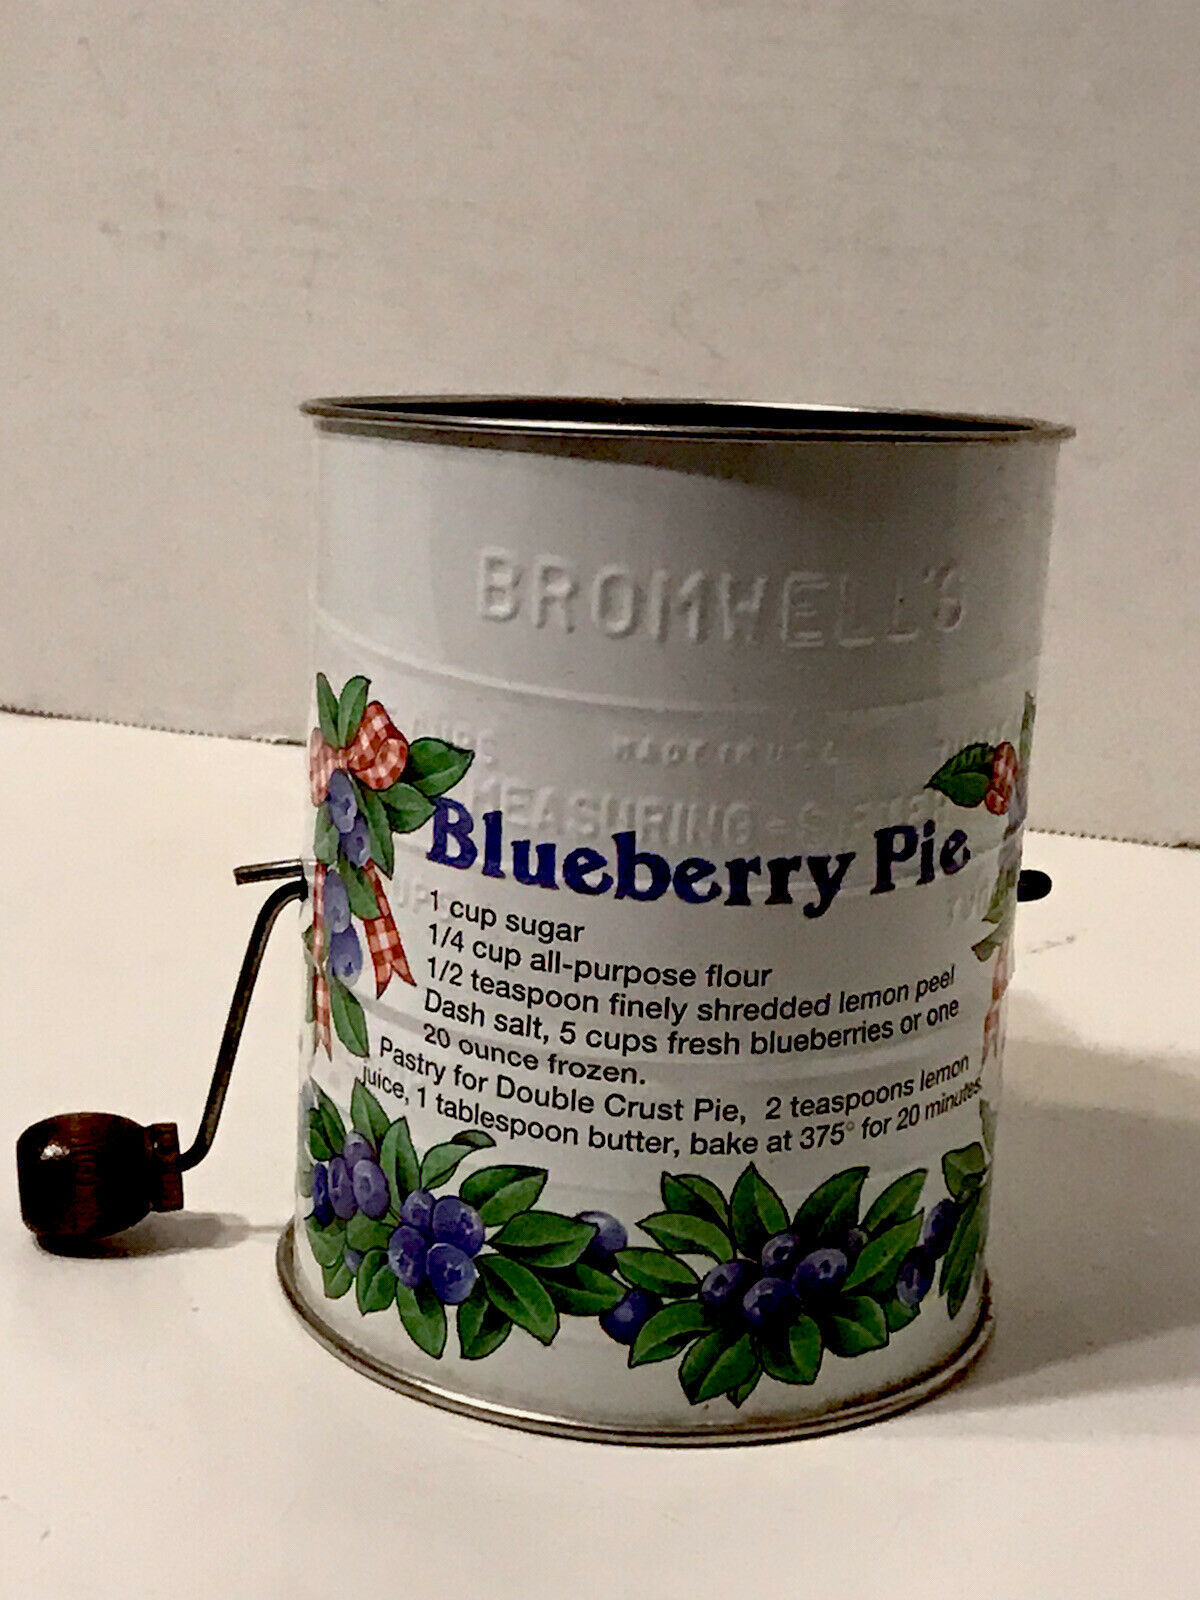 Bromwell’s Susan Lowenstein ‘95 Blueberry Pie 3 Cup Measuring Sifter